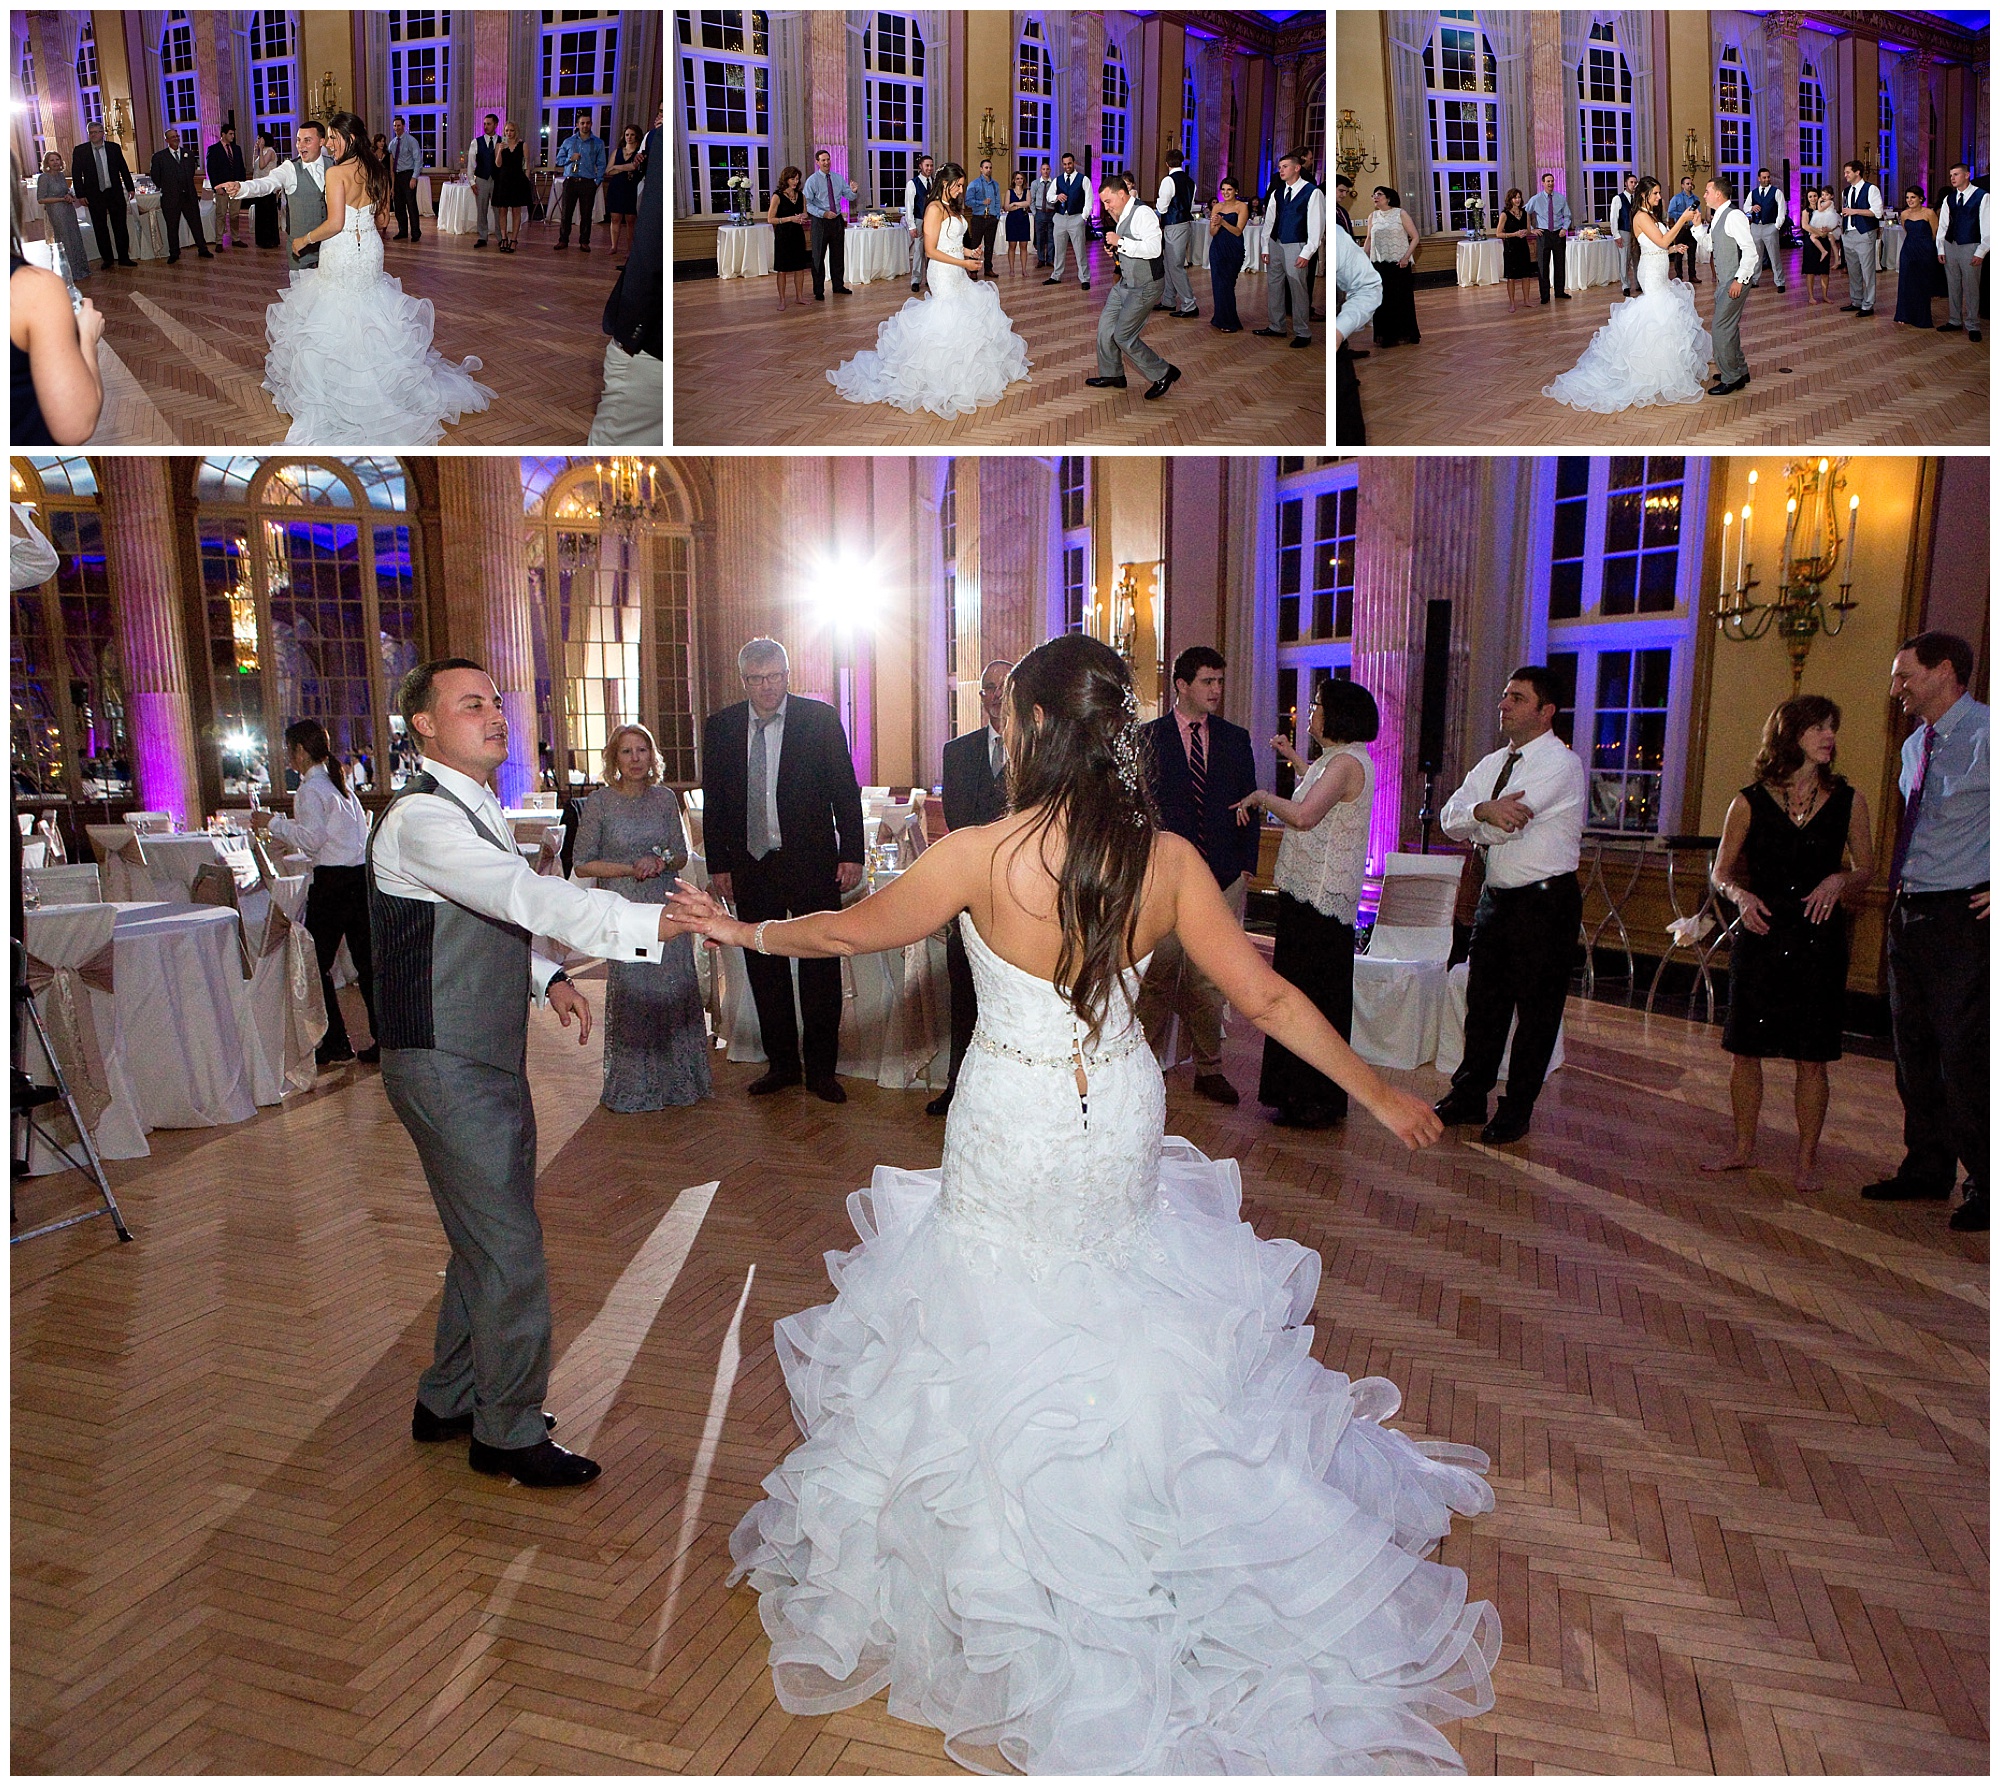 Photos of the bride and her groom dancing at their reception